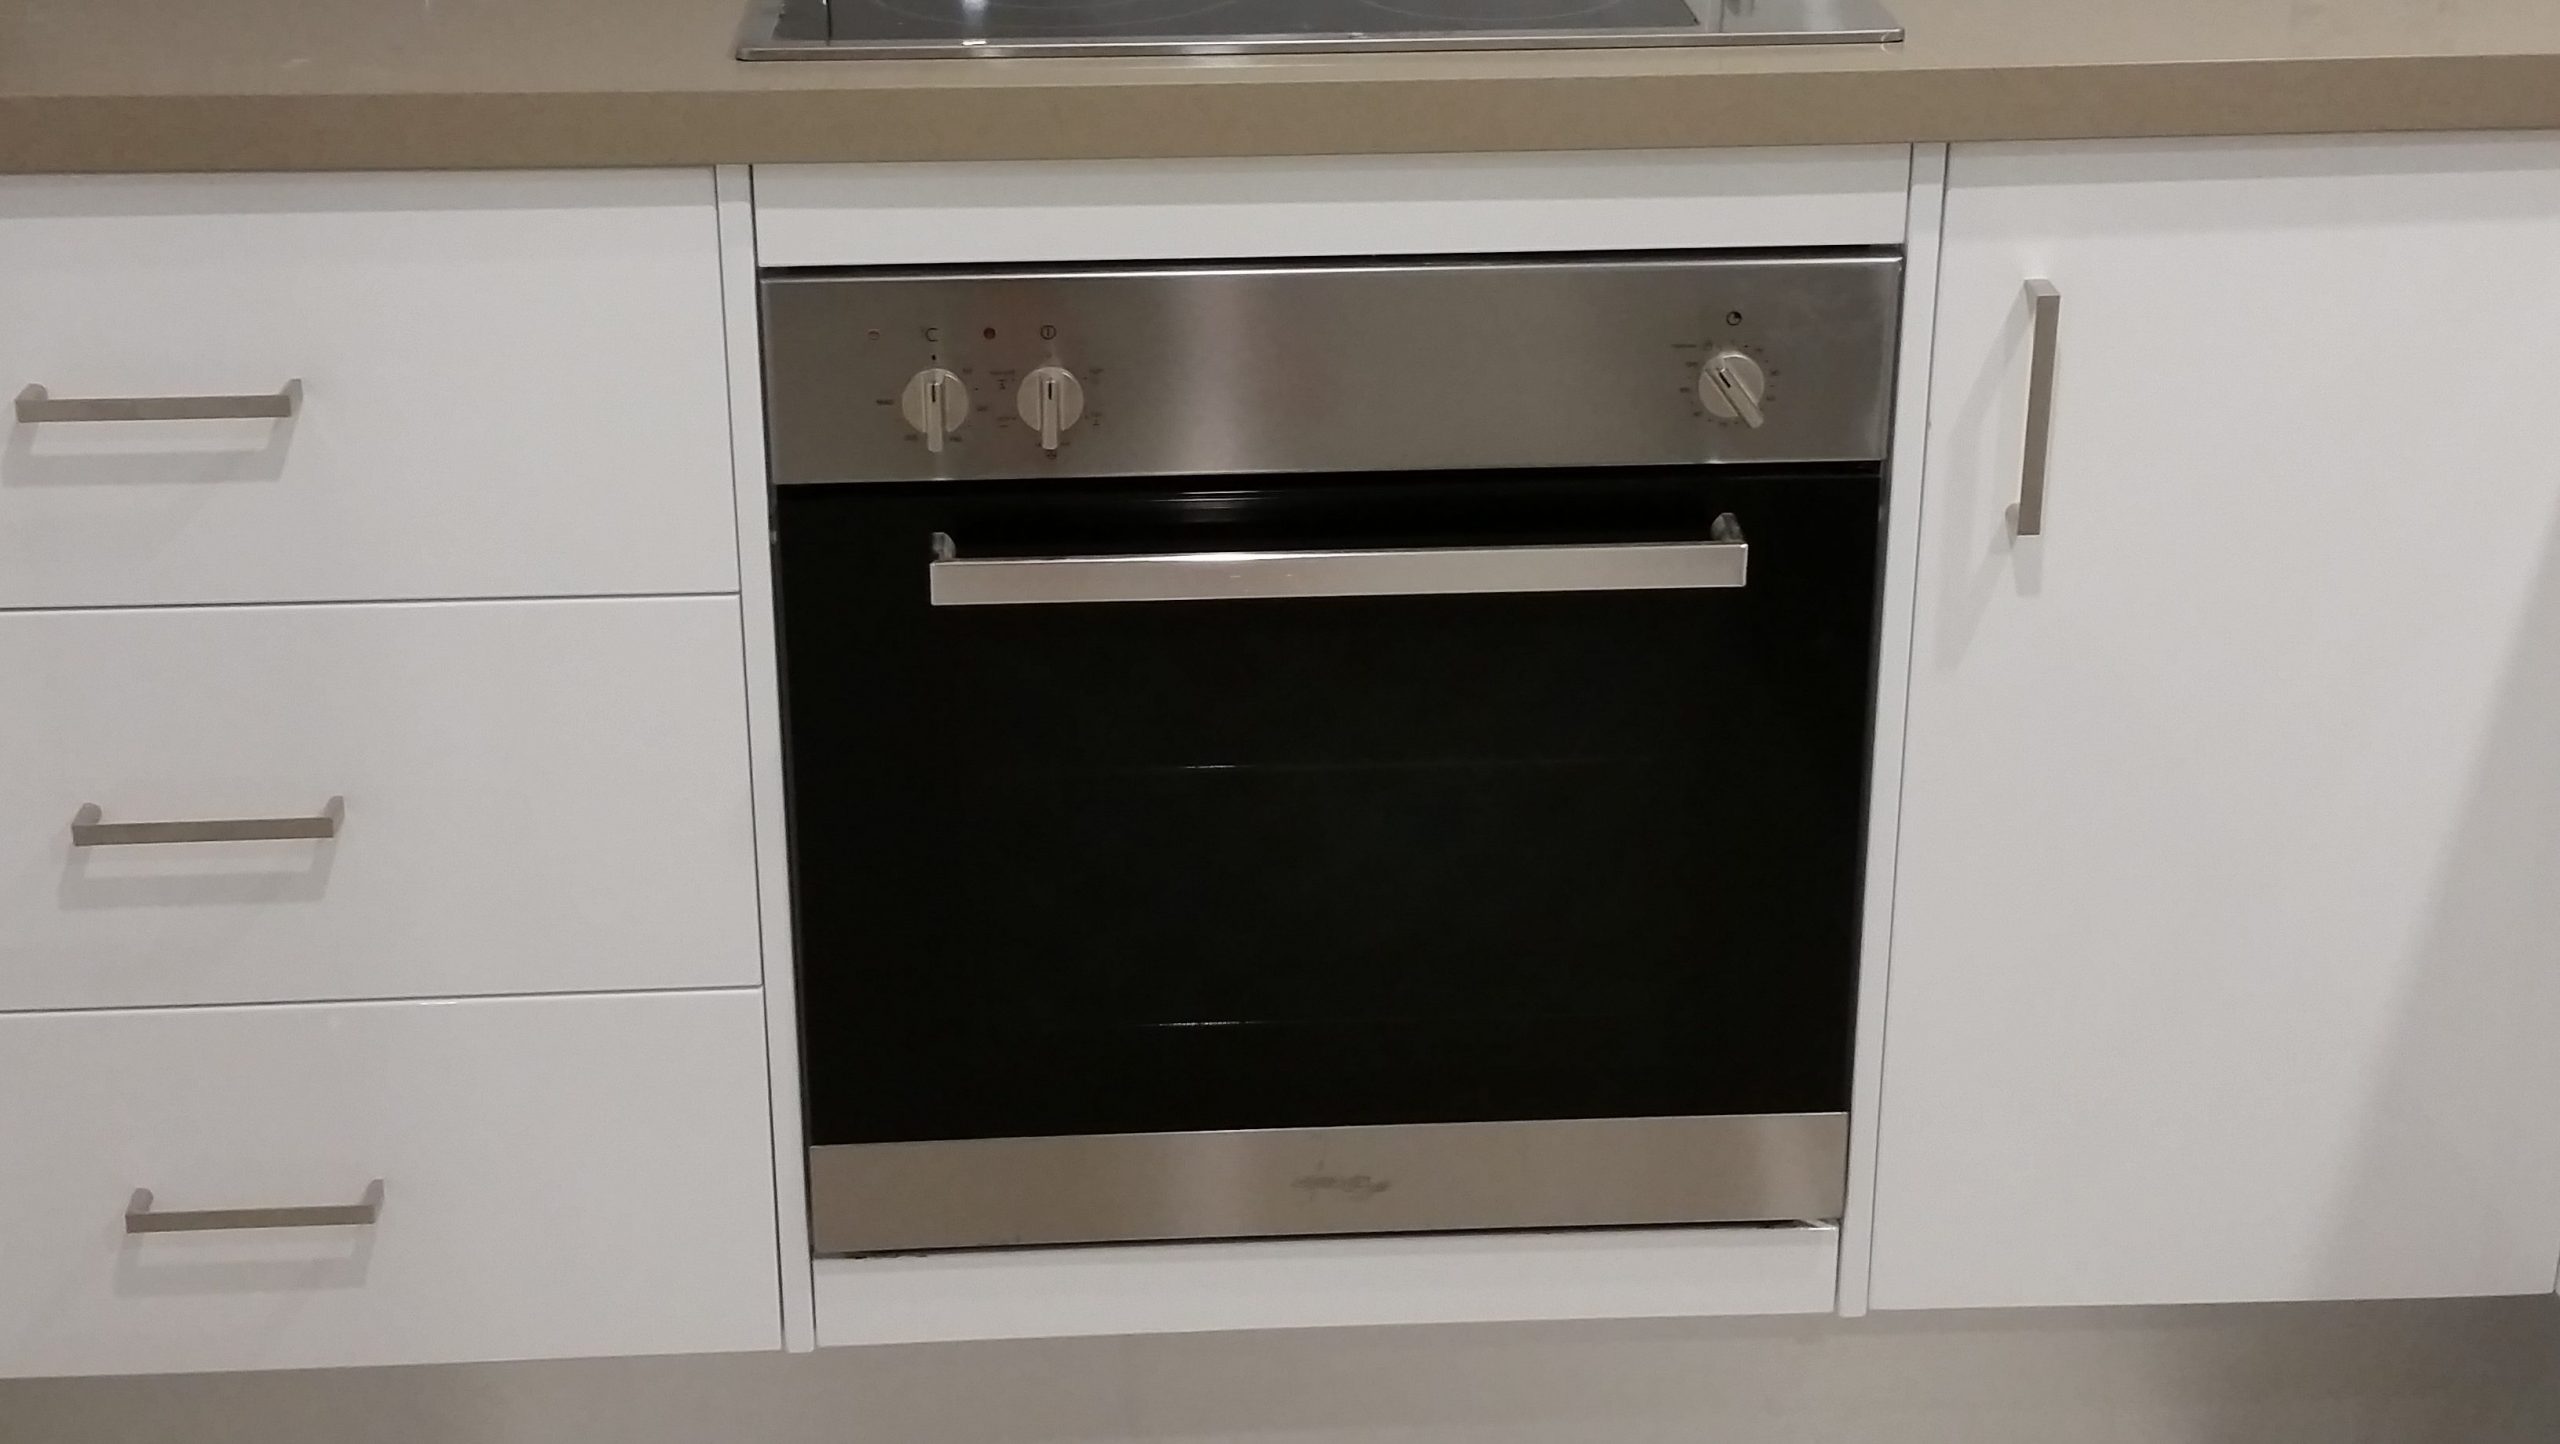 Ovenlec Traralgon Oven Repairs - Talk directly to the oven repair and oven door repair specialist for a free oven repair estimate.